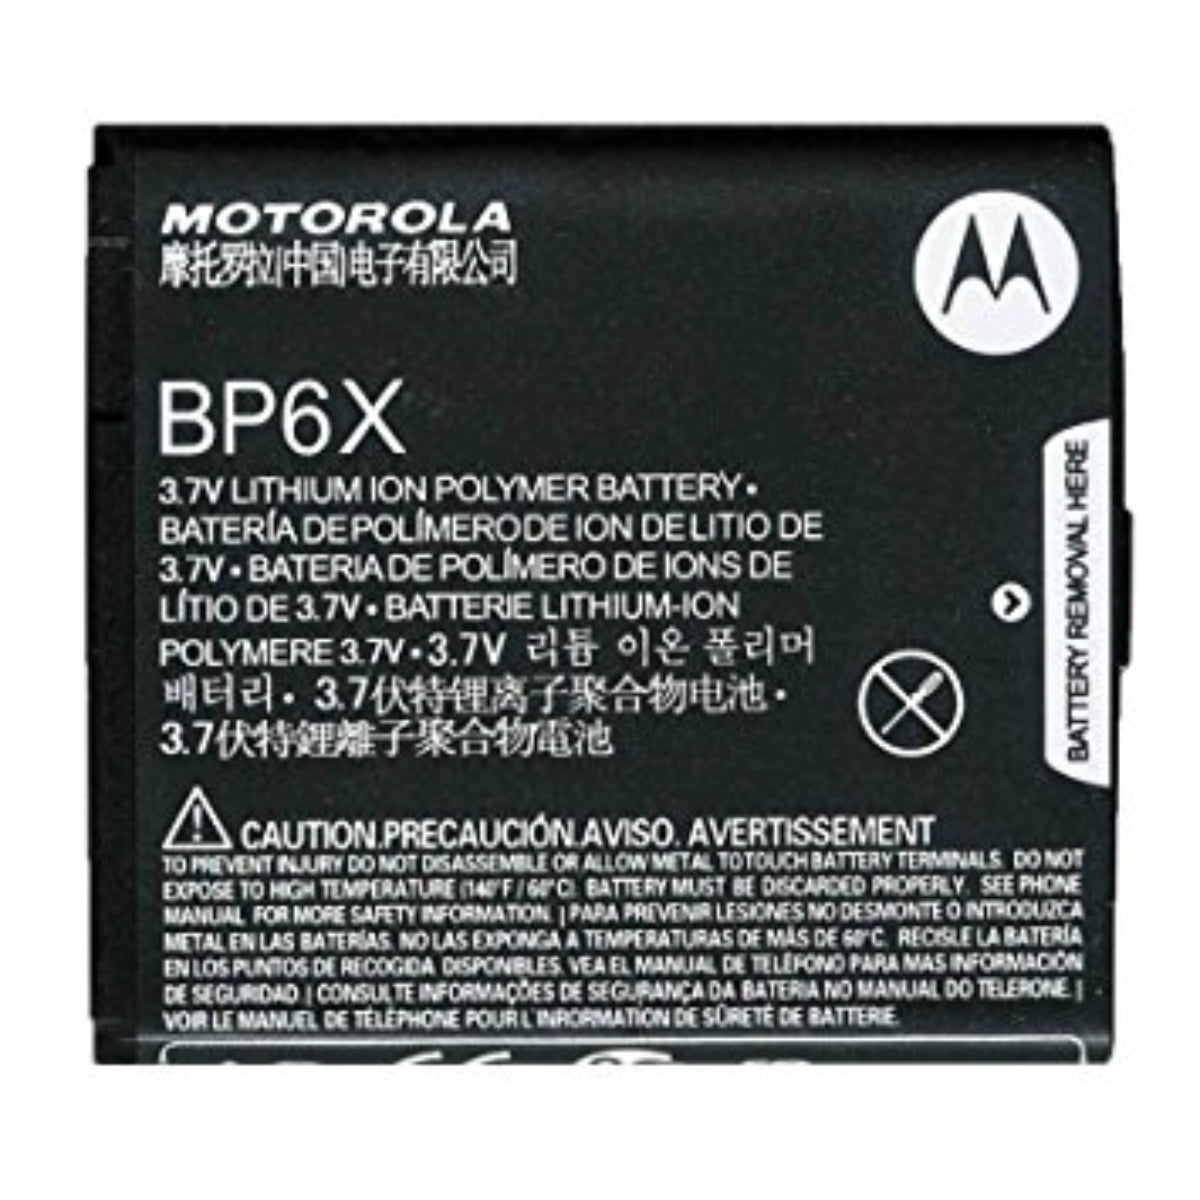 Motorola Rechargeable (1,390mAh) OEM Battery (BP6X) for Droid & Droid 2 Cell Phone - Batteries Motorola    - Simple Cell Bulk Wholesale Pricing - USA Seller